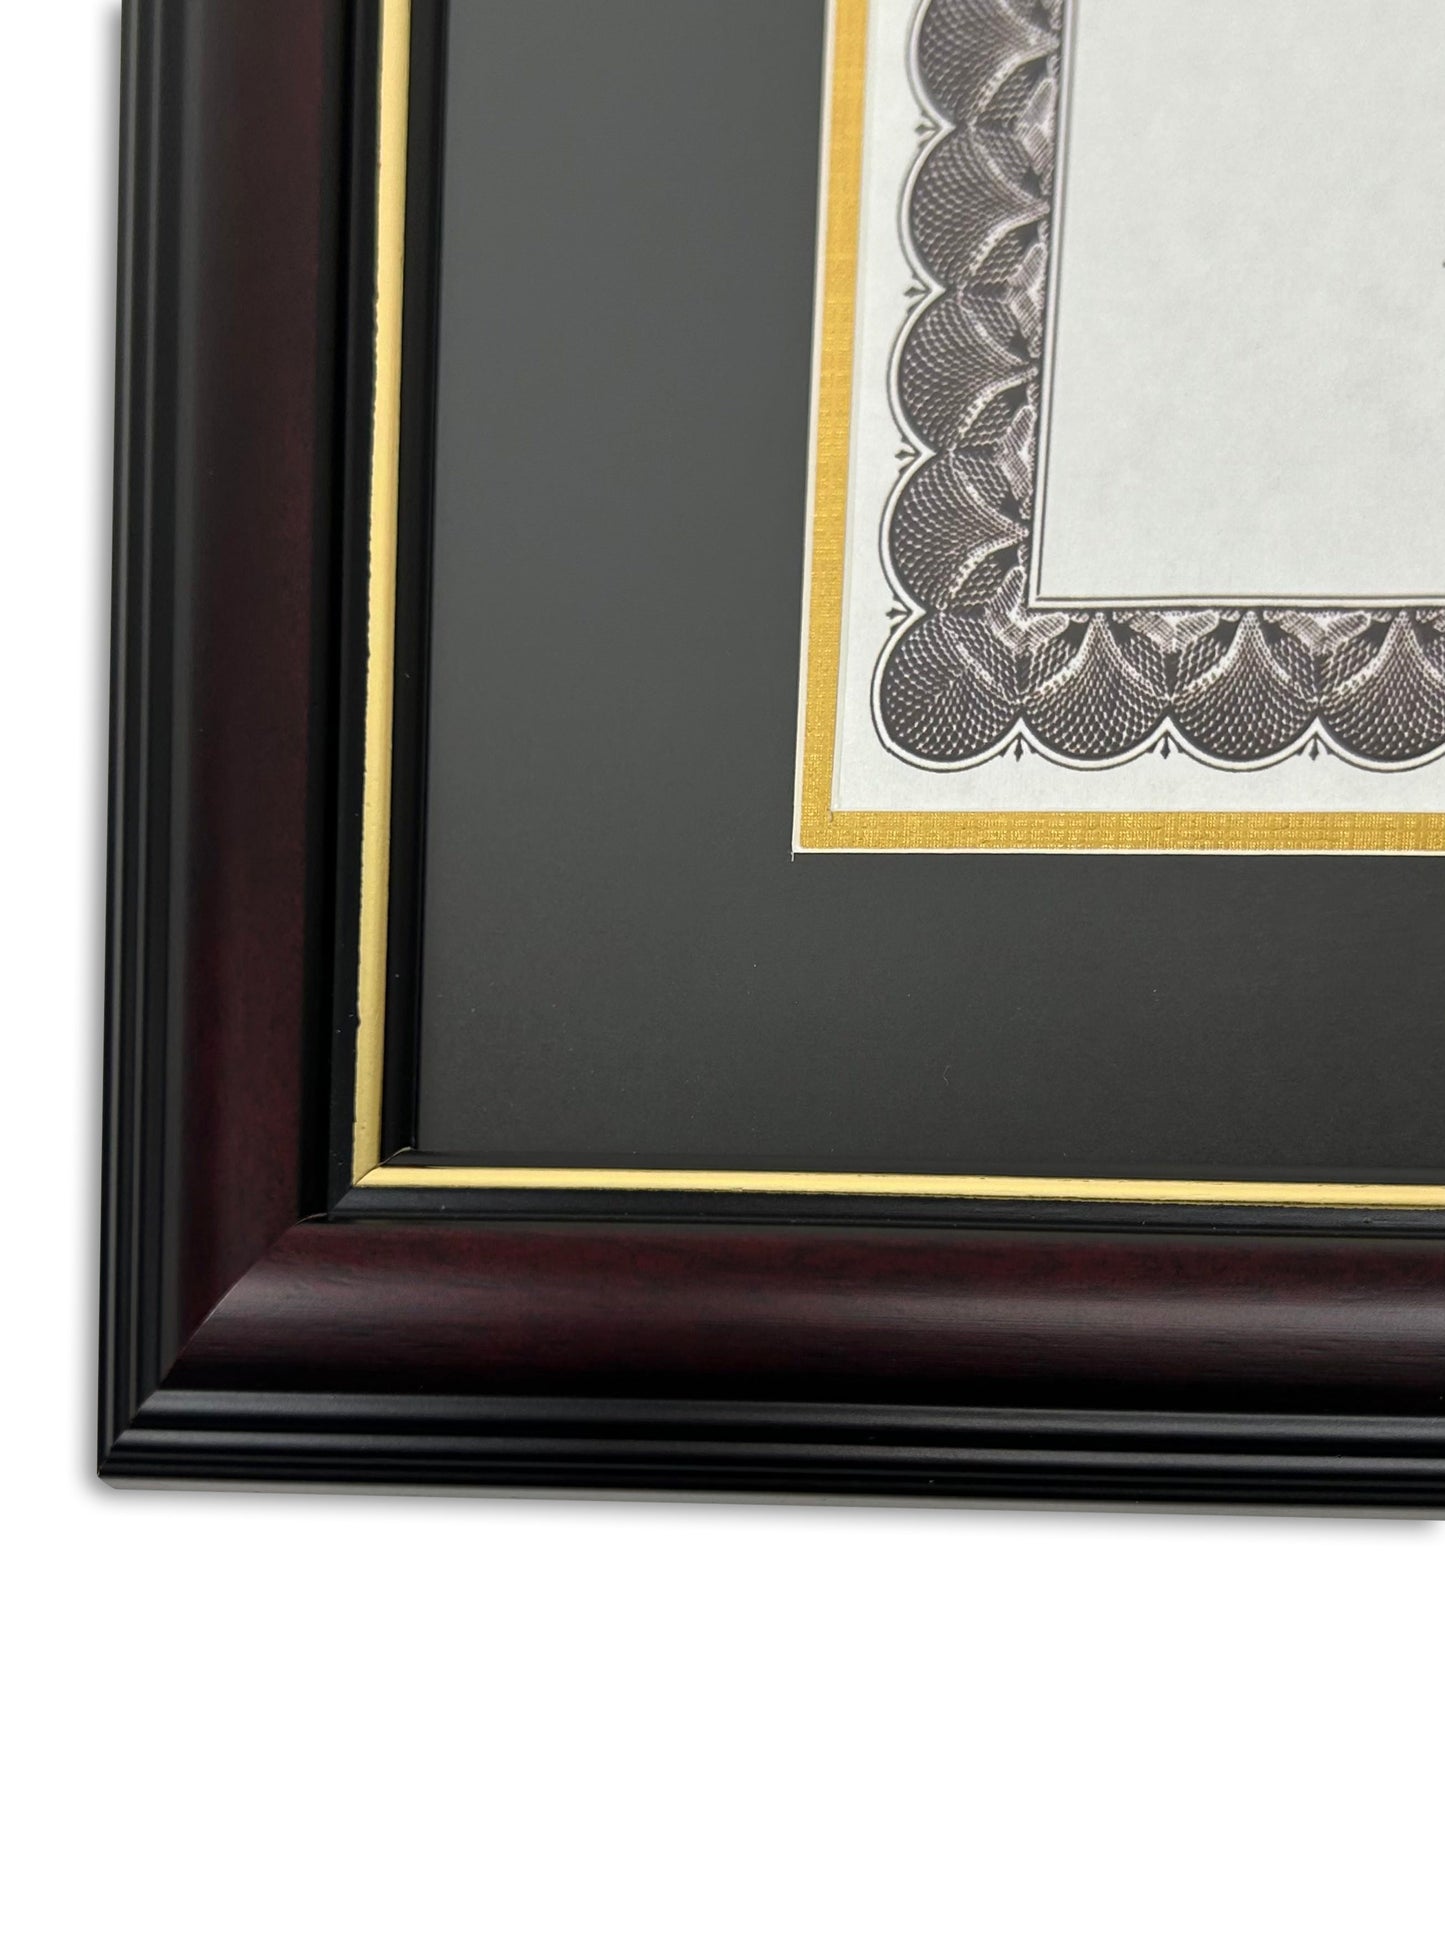 Graduation Diploma Frame in Real Wood Glossy Cherry with Gold Trim, Fits 8.5" x 11" or 11" x 14" Certificate